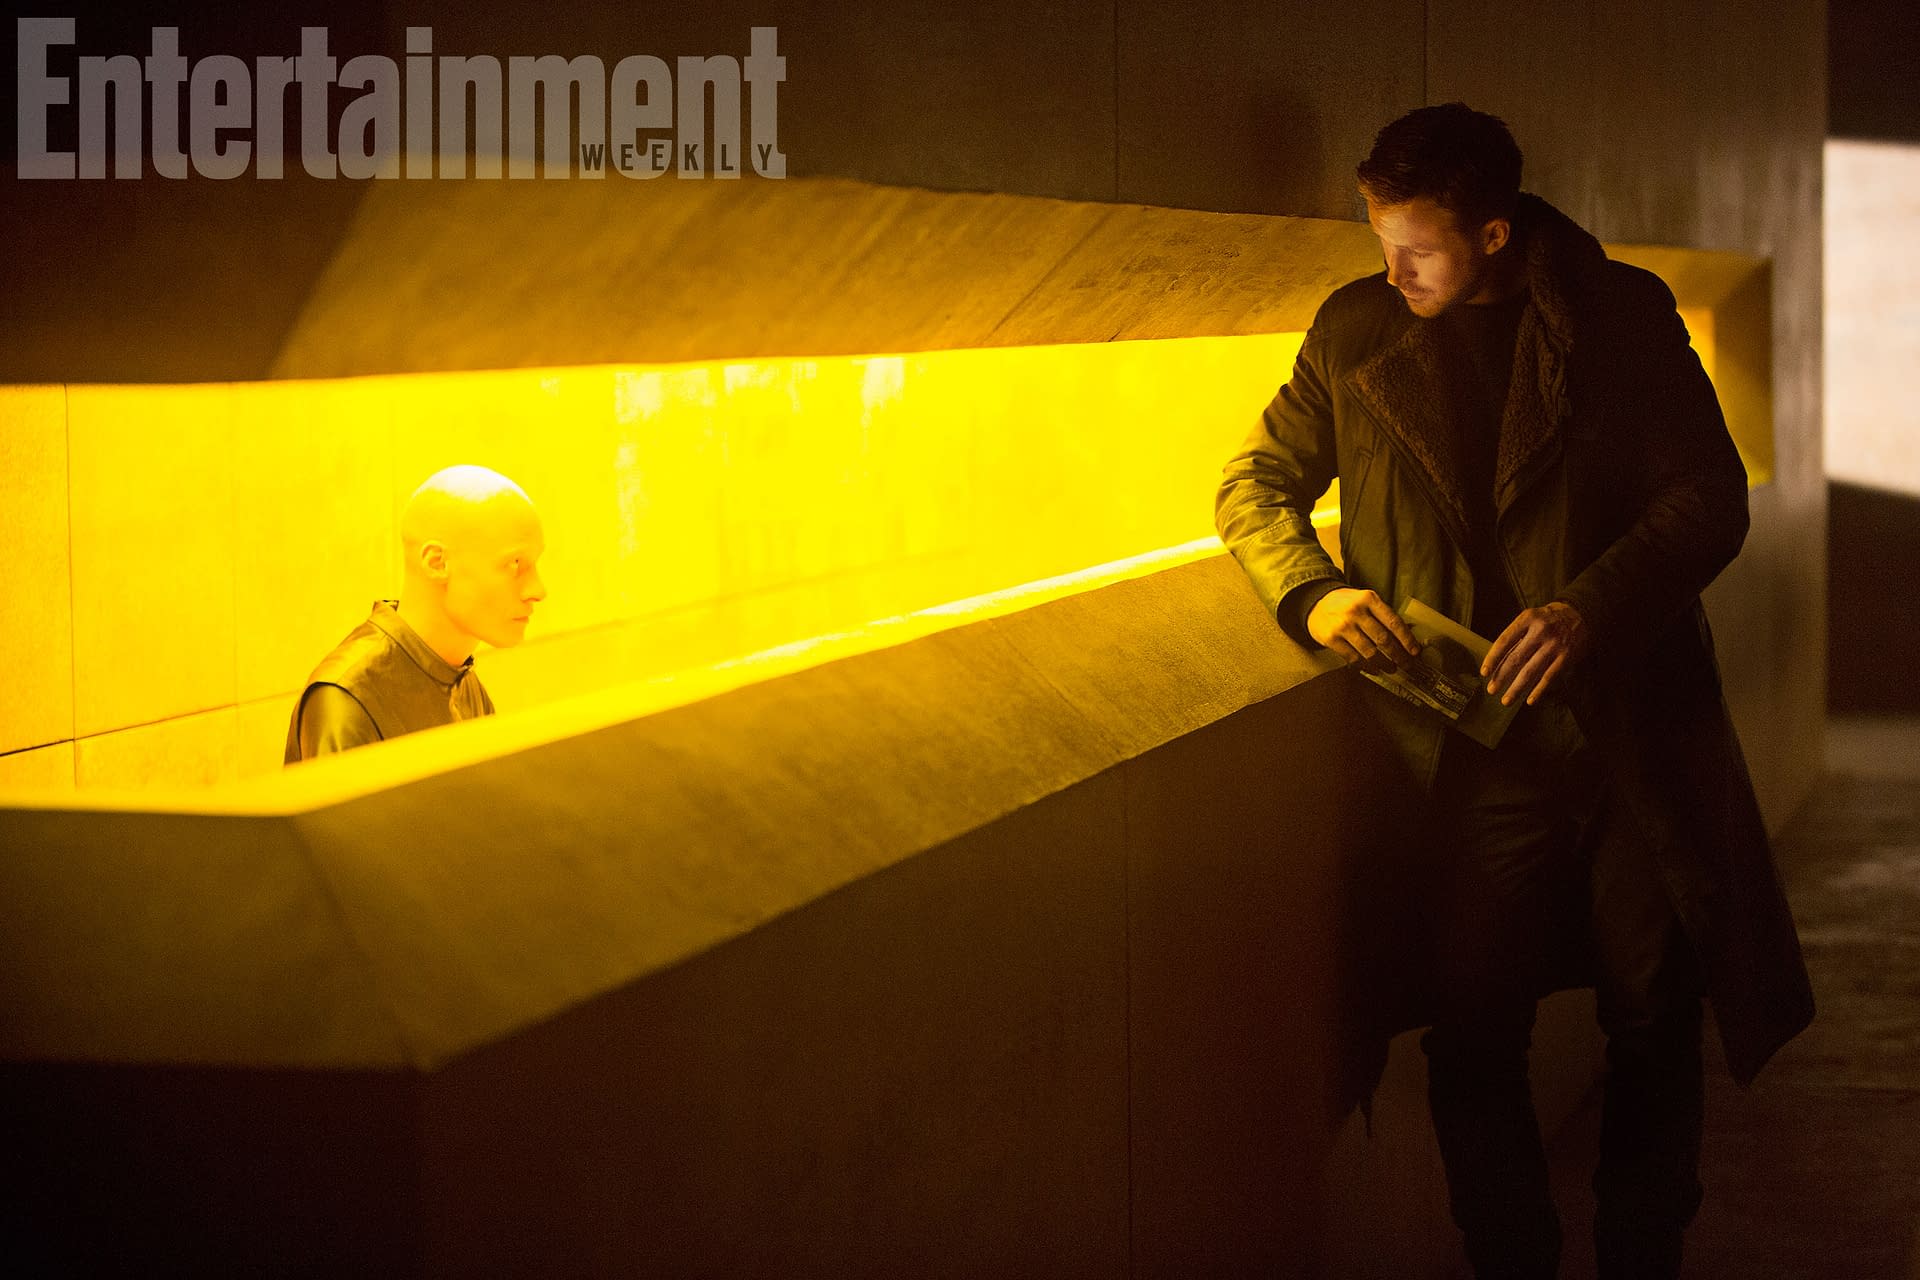 New Images And An Empire Cover For 'Blade Runner 2049'